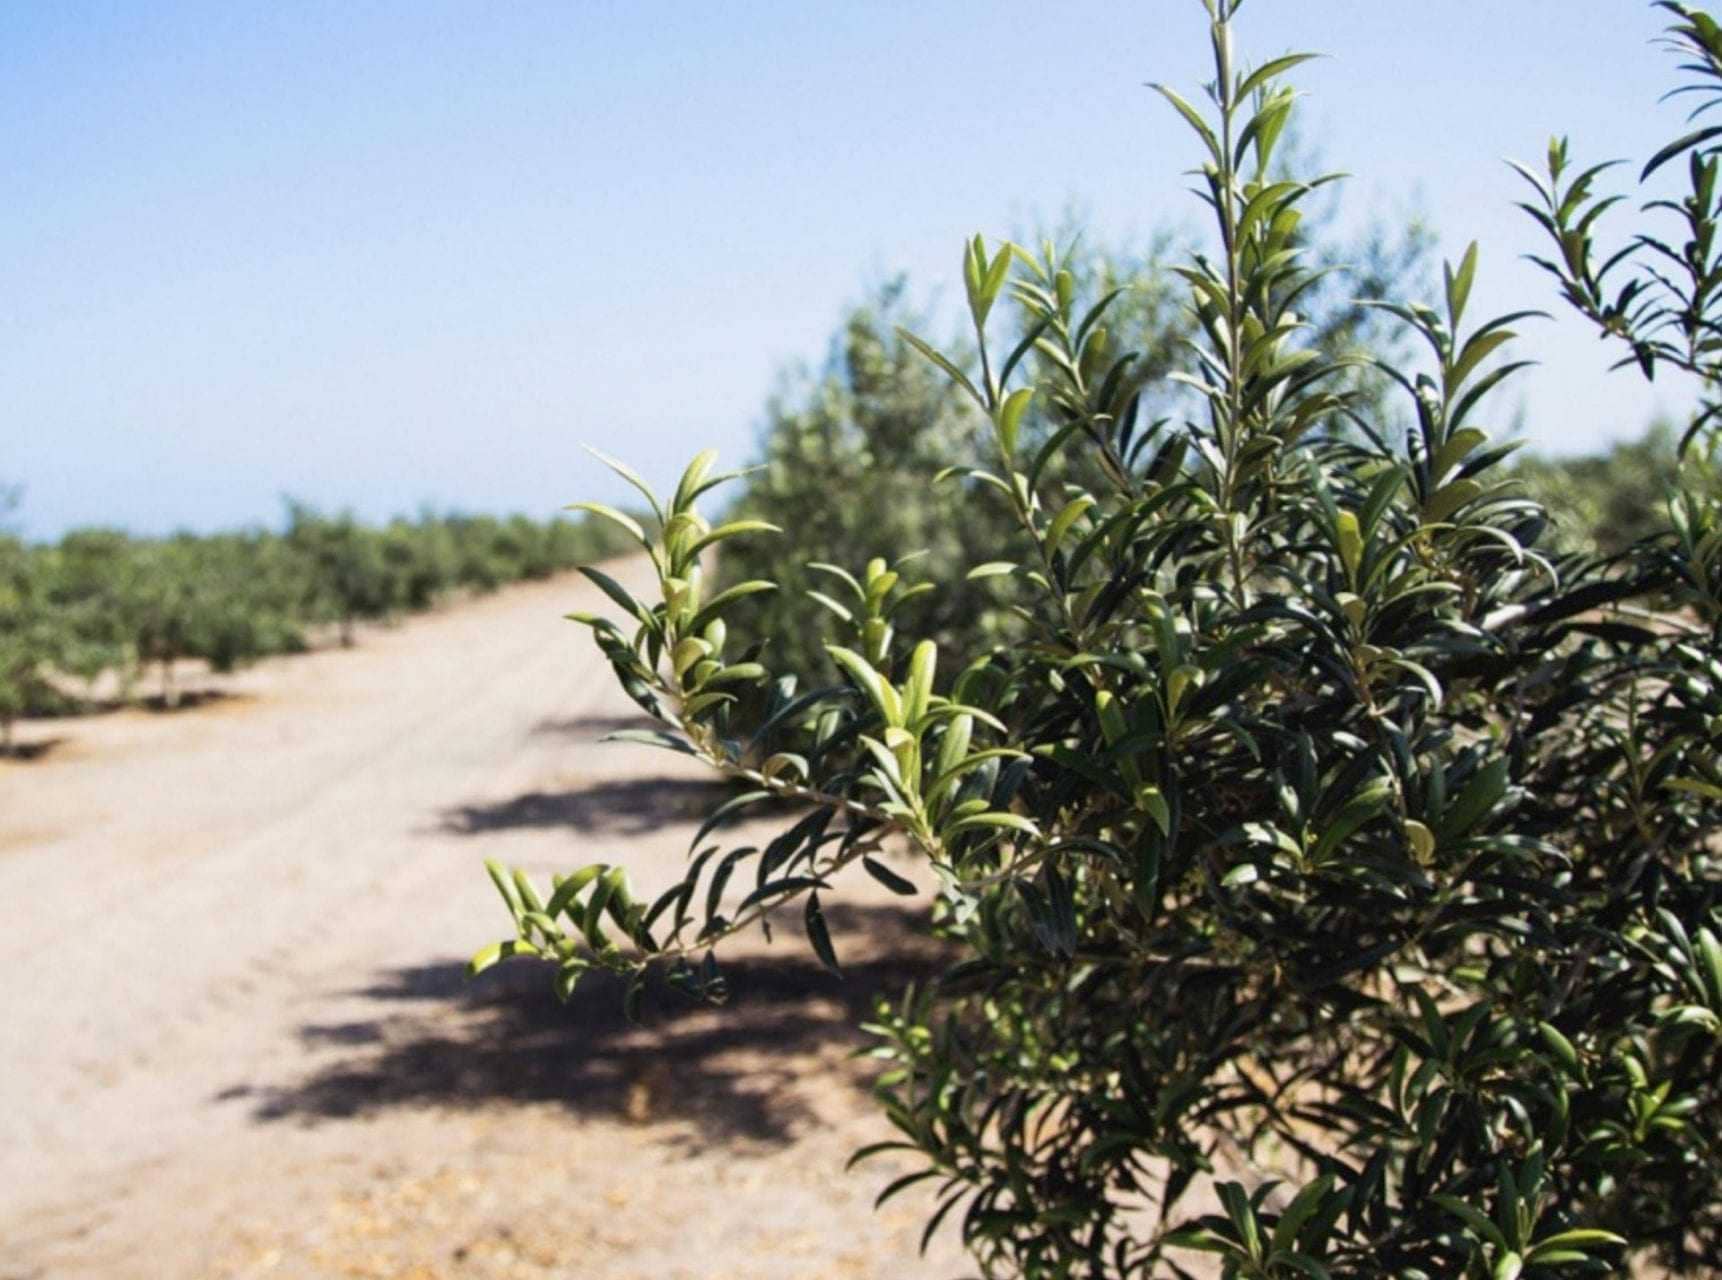 business-production-south-america-an-olive-harvest-in-peru-amid-sweeping-changes-olive-oil-times